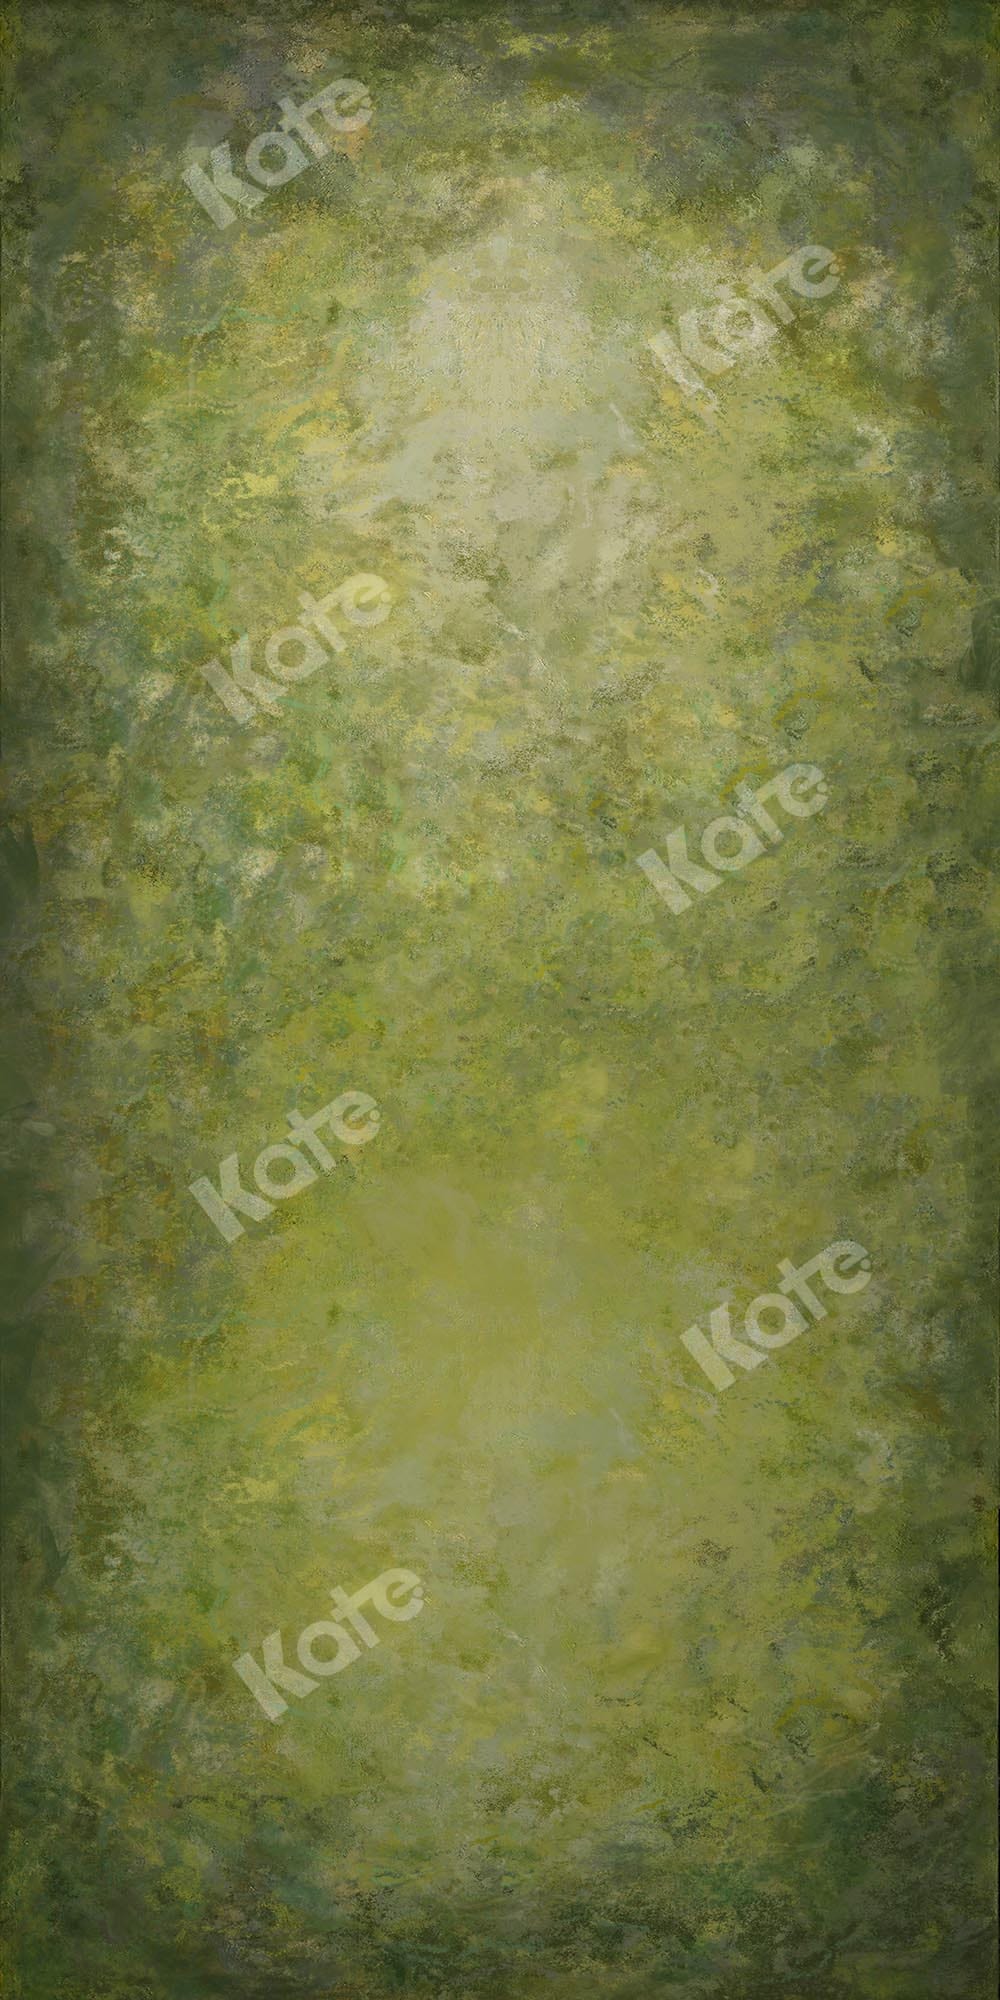 An abstract vertical background with a textured blend of green and yellow hues marked with repeated watermark text "Kate," crafted on warp-knitted short-pile fabric, is the Kate Sweep Green Abstract Backdrop for Photography.